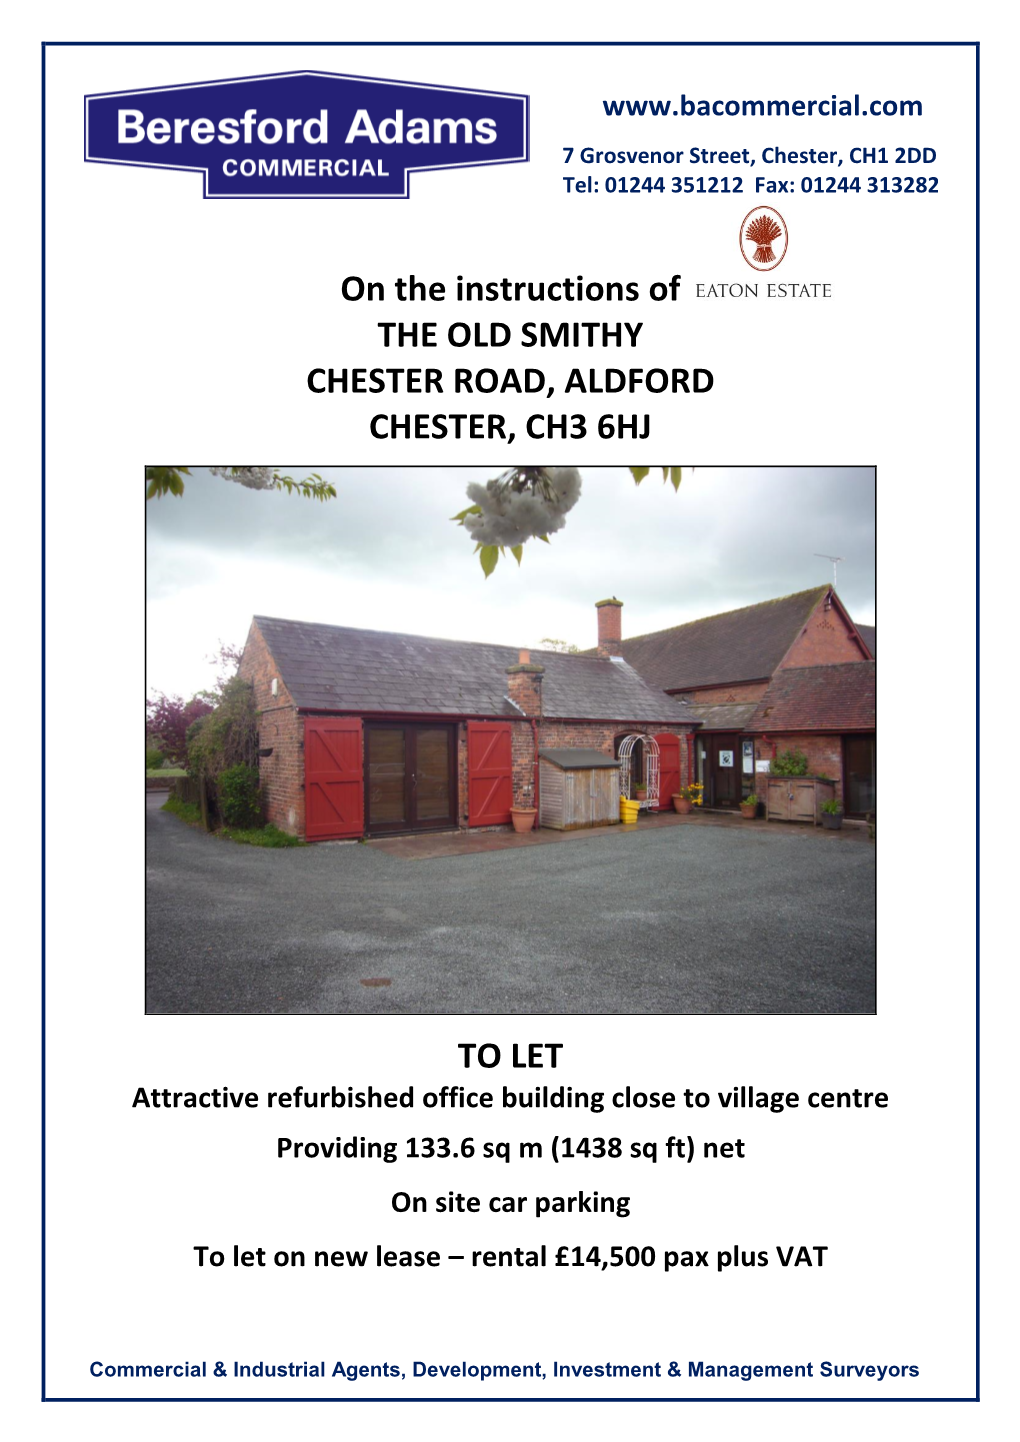 On the Instructions of the OLD SMITHY CHESTER ROAD, ALDFORD CHESTER, CH3 6HJ